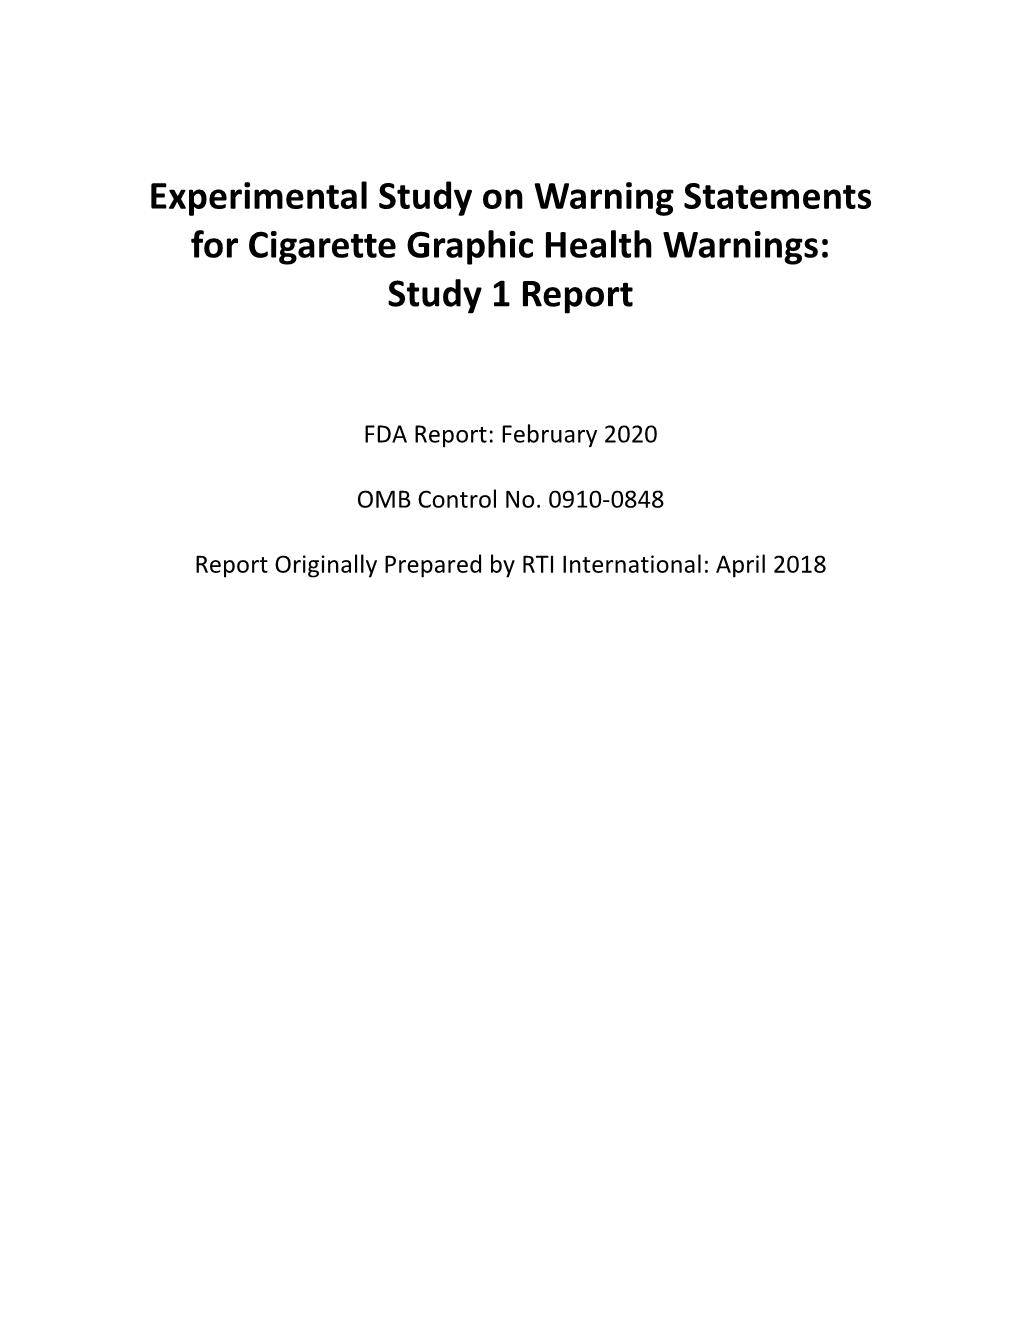 Experimental Study on Warning Statements for Cigarette Graphic Health Warnings: Study 1 Report